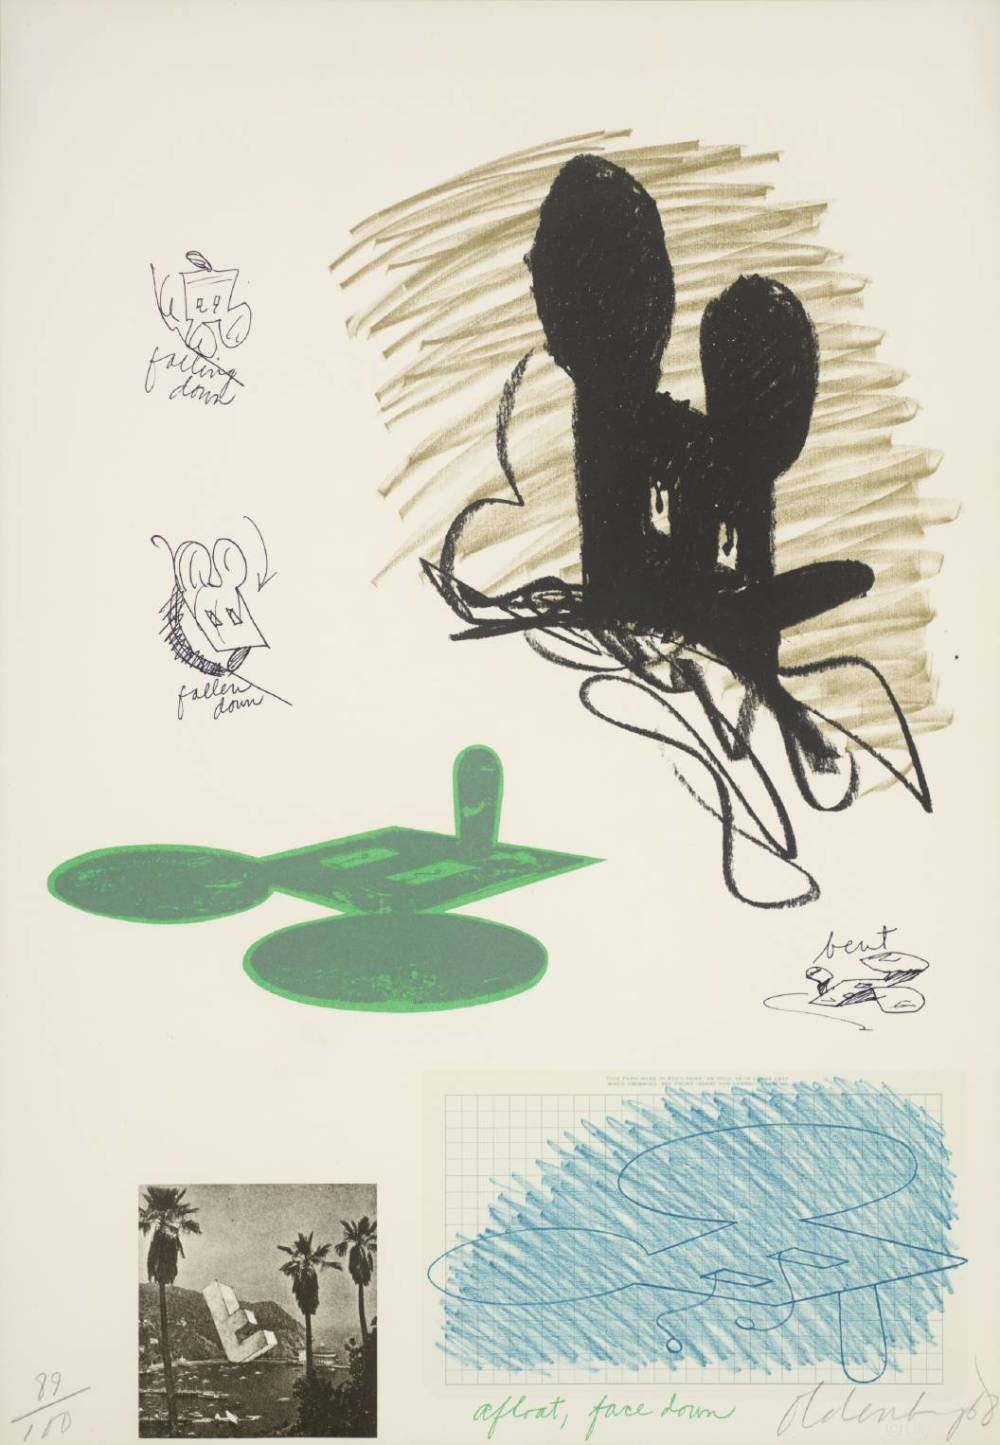  Claes Oldenburg, Notes (Micky Mouse), 1968 